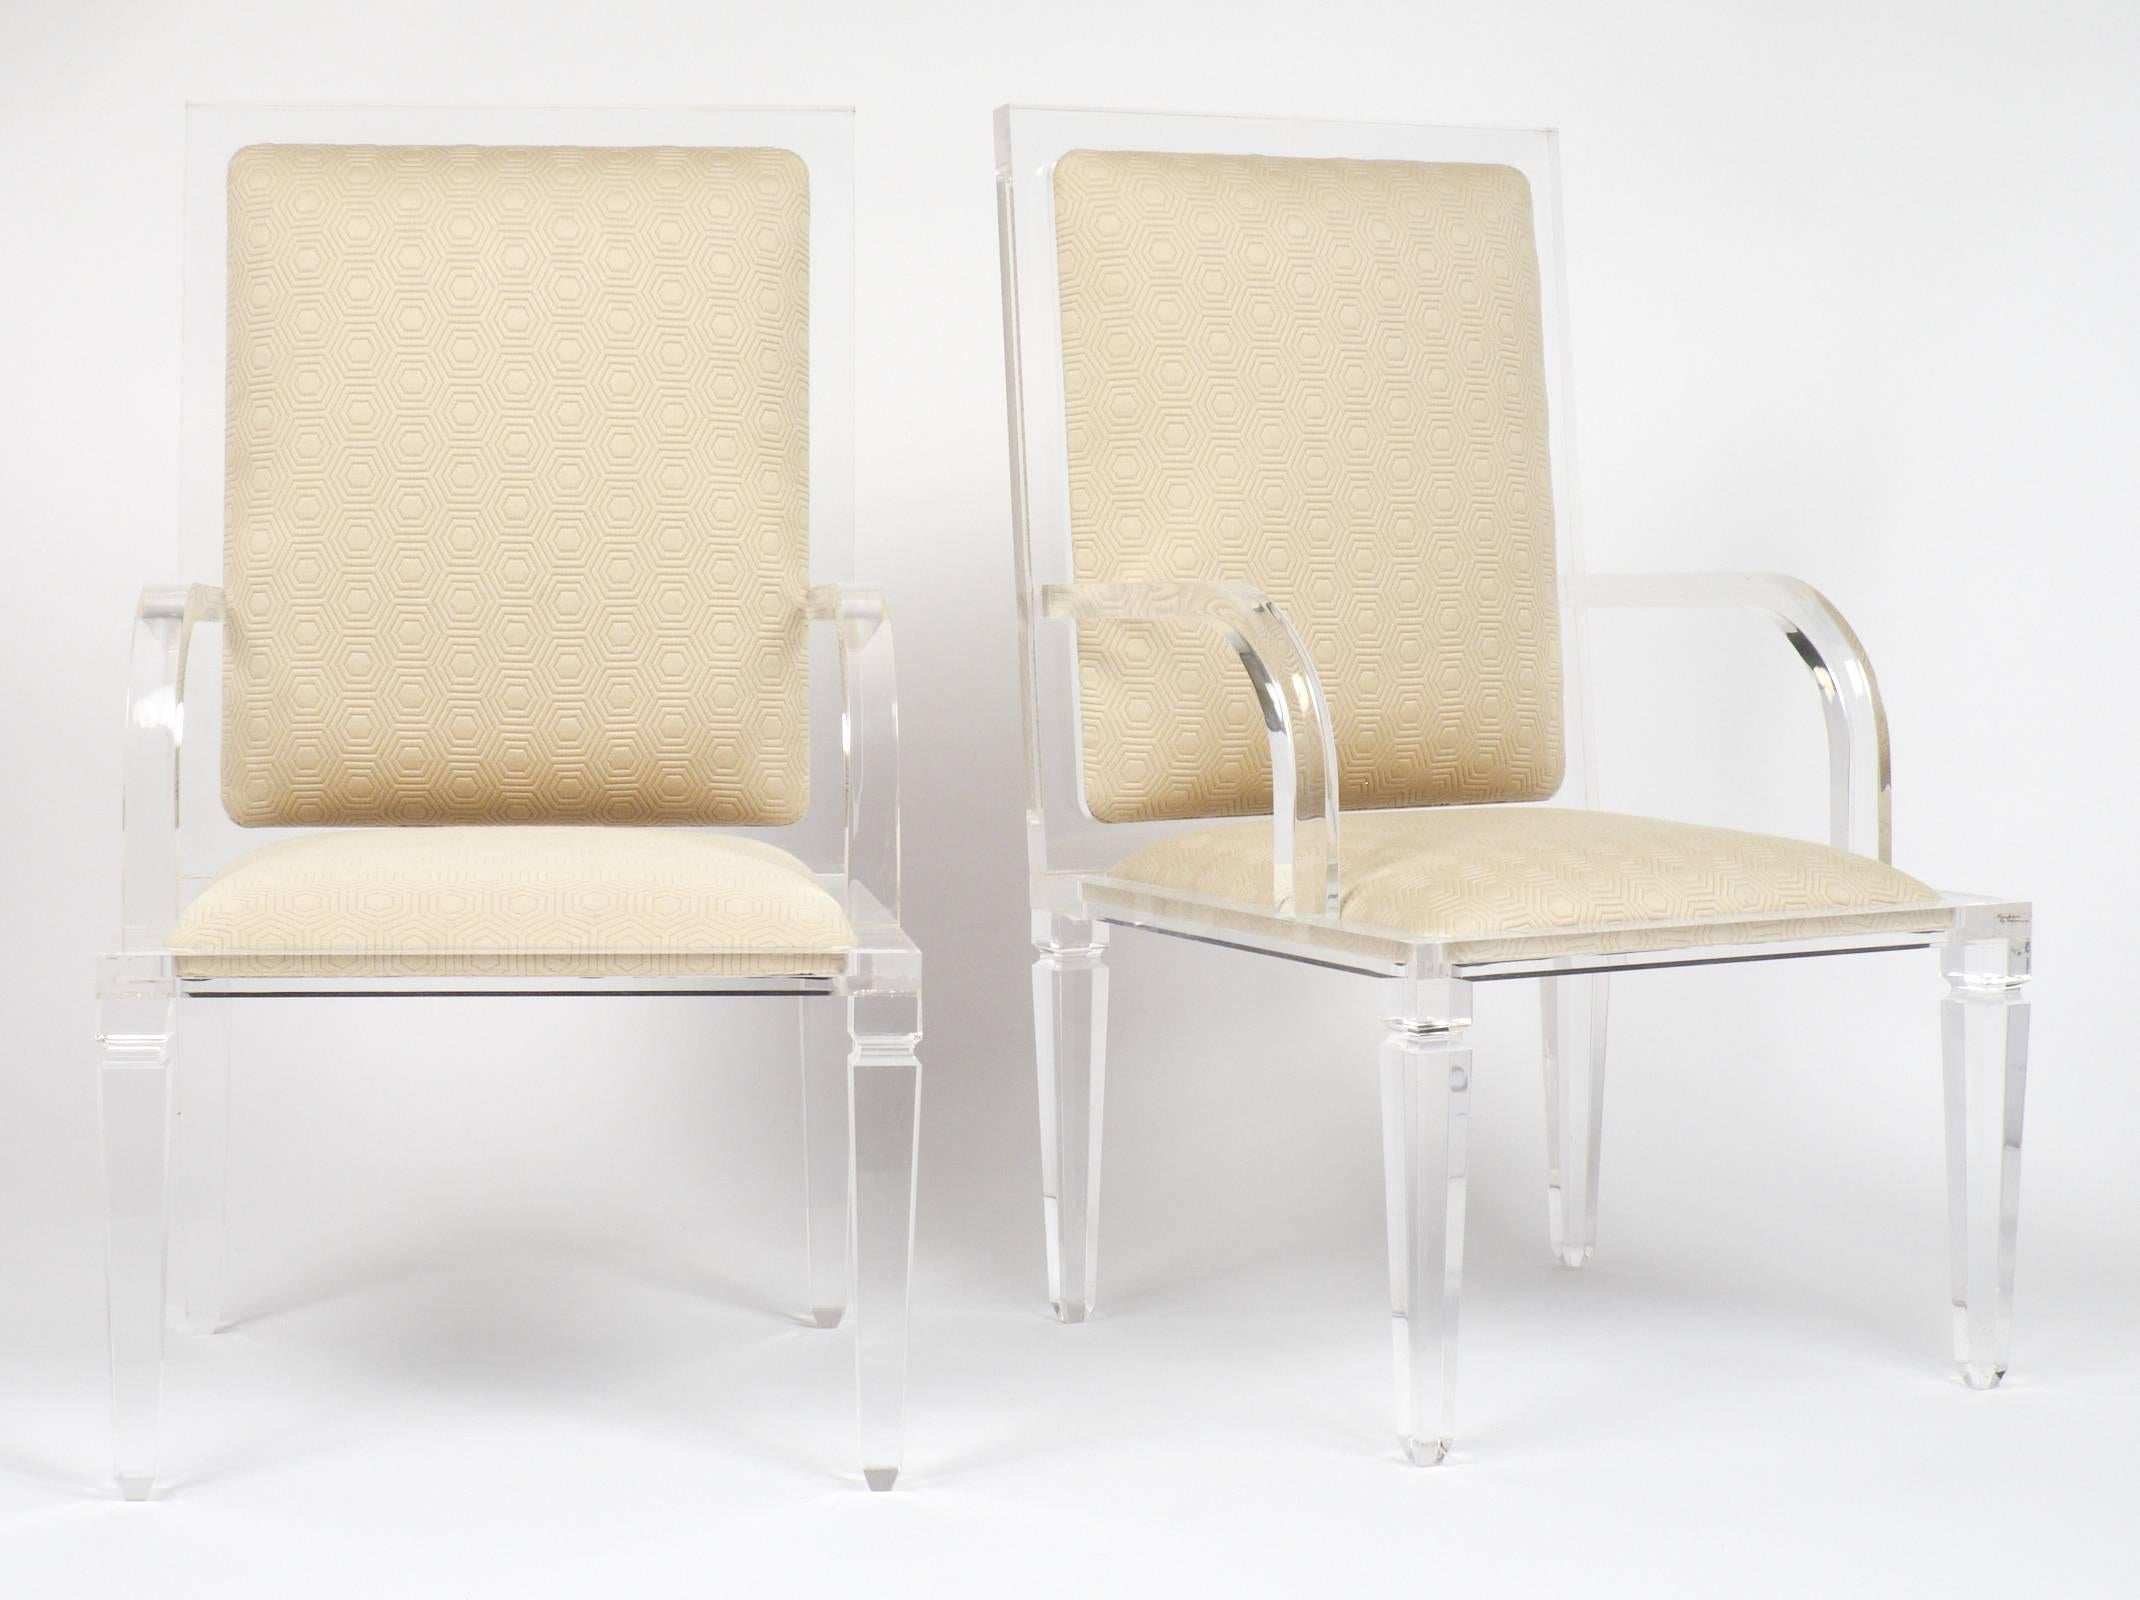 Italian vintage pair of armchairs in Lucite (clear acrylic) by Fabian, Rome-Italy, with tapered and beveled legs. New Schumacher honeycomb greige upholstery. A clean and modern, decorative pair of armchairs.
                  